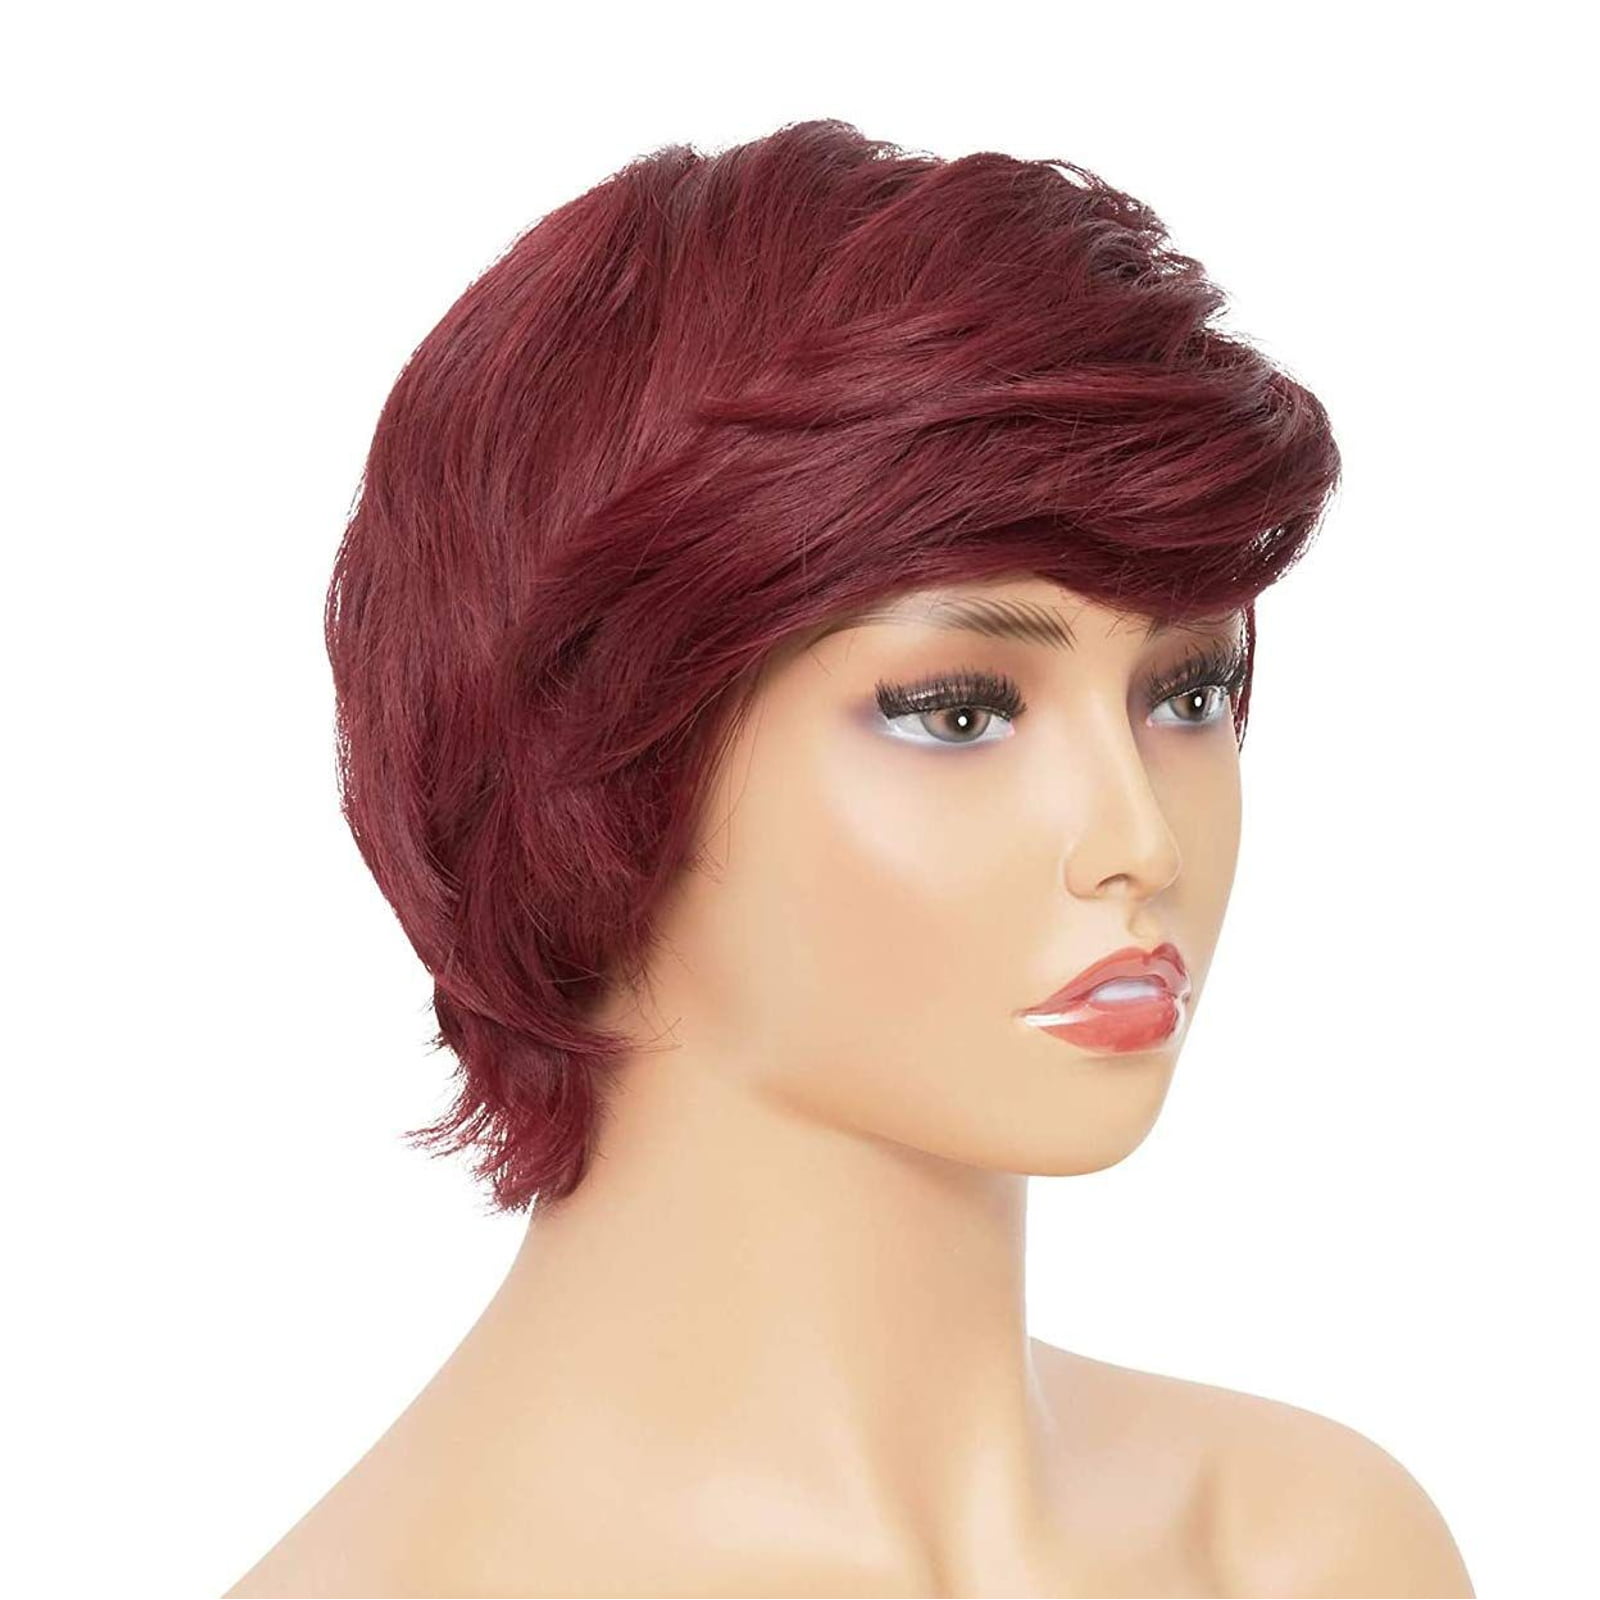 New Short Pixie Cut Wigs Women Synthetic Curly Hair Wig Ombre Layered Wavy Party